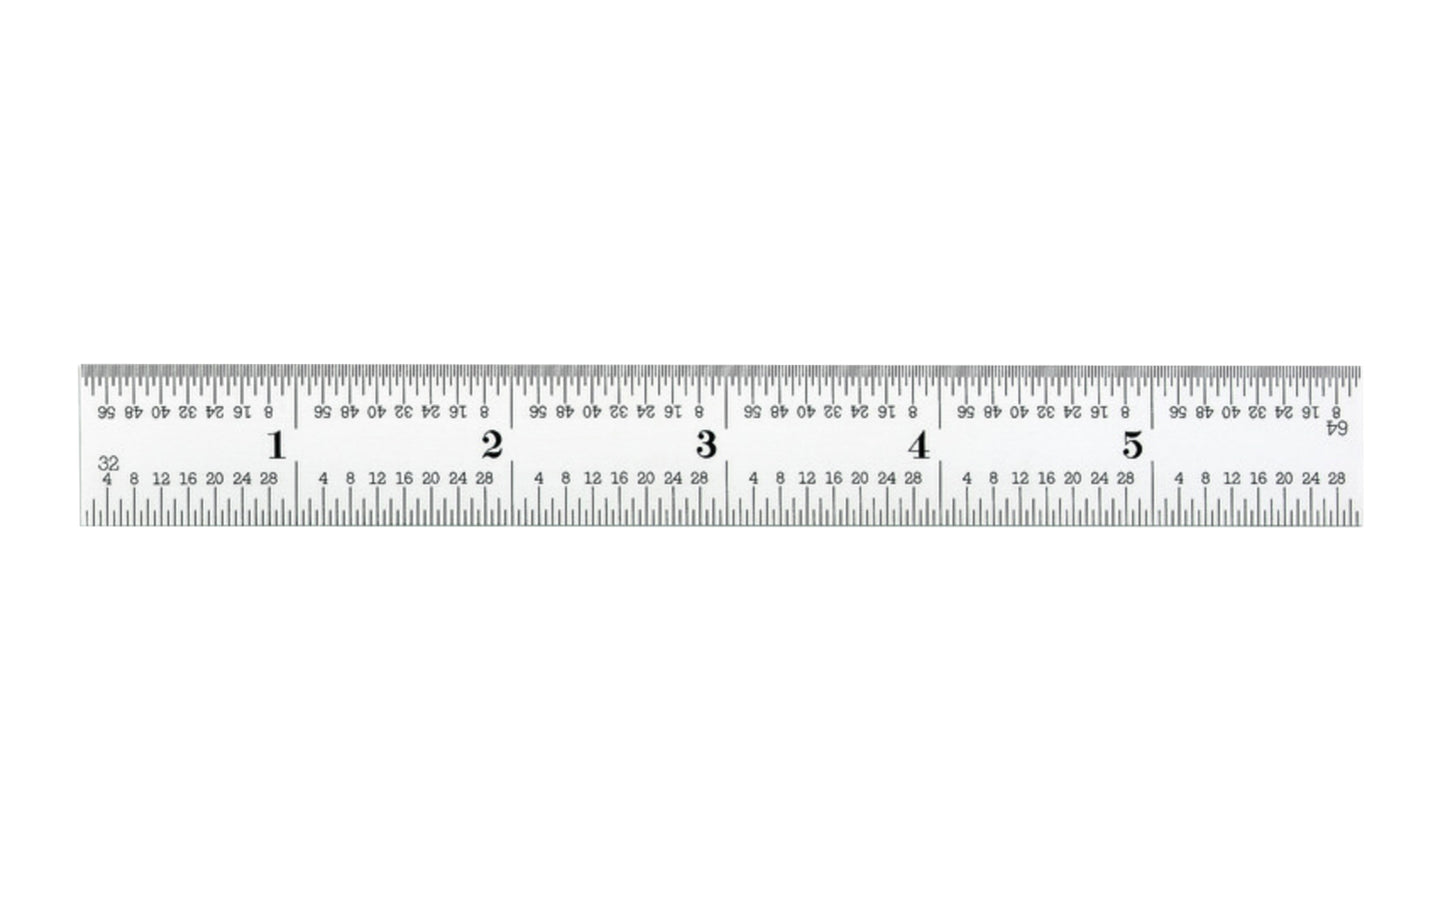 Starrett 6" Spring-Tempered Steel Rule with Inch Graduation features a satin chrome finish. Graduations at quick-reading 32nds, 64ths, aircraft quick-reading 1/50", 1/100", 1/32", 1/64", 16R Grads. Model C616R-6.   Made in USA.